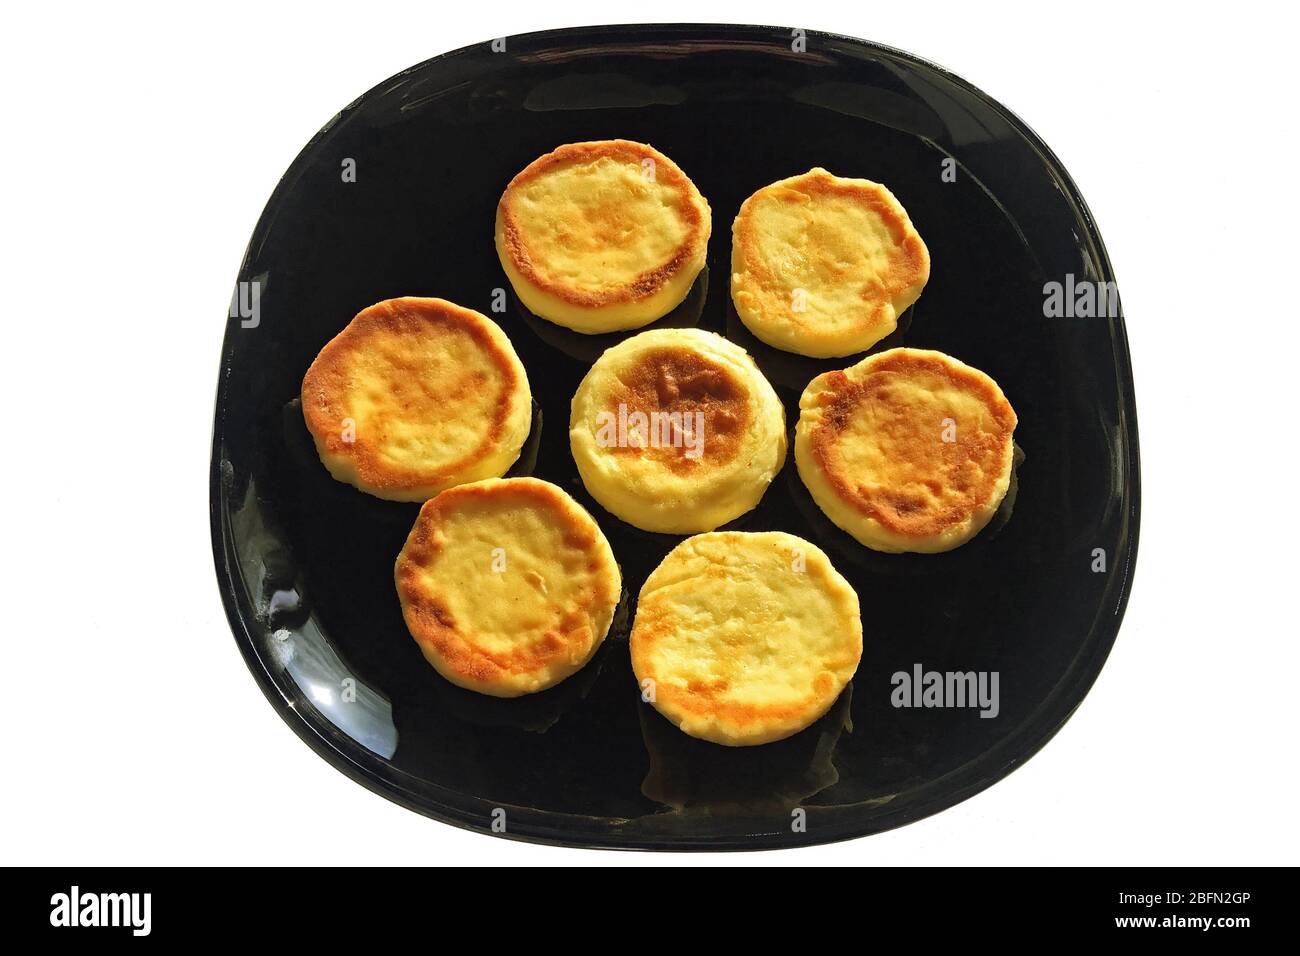 Delicious rosy fried cheesecakes on a dark dish, isolated on a white background. Stock Photo